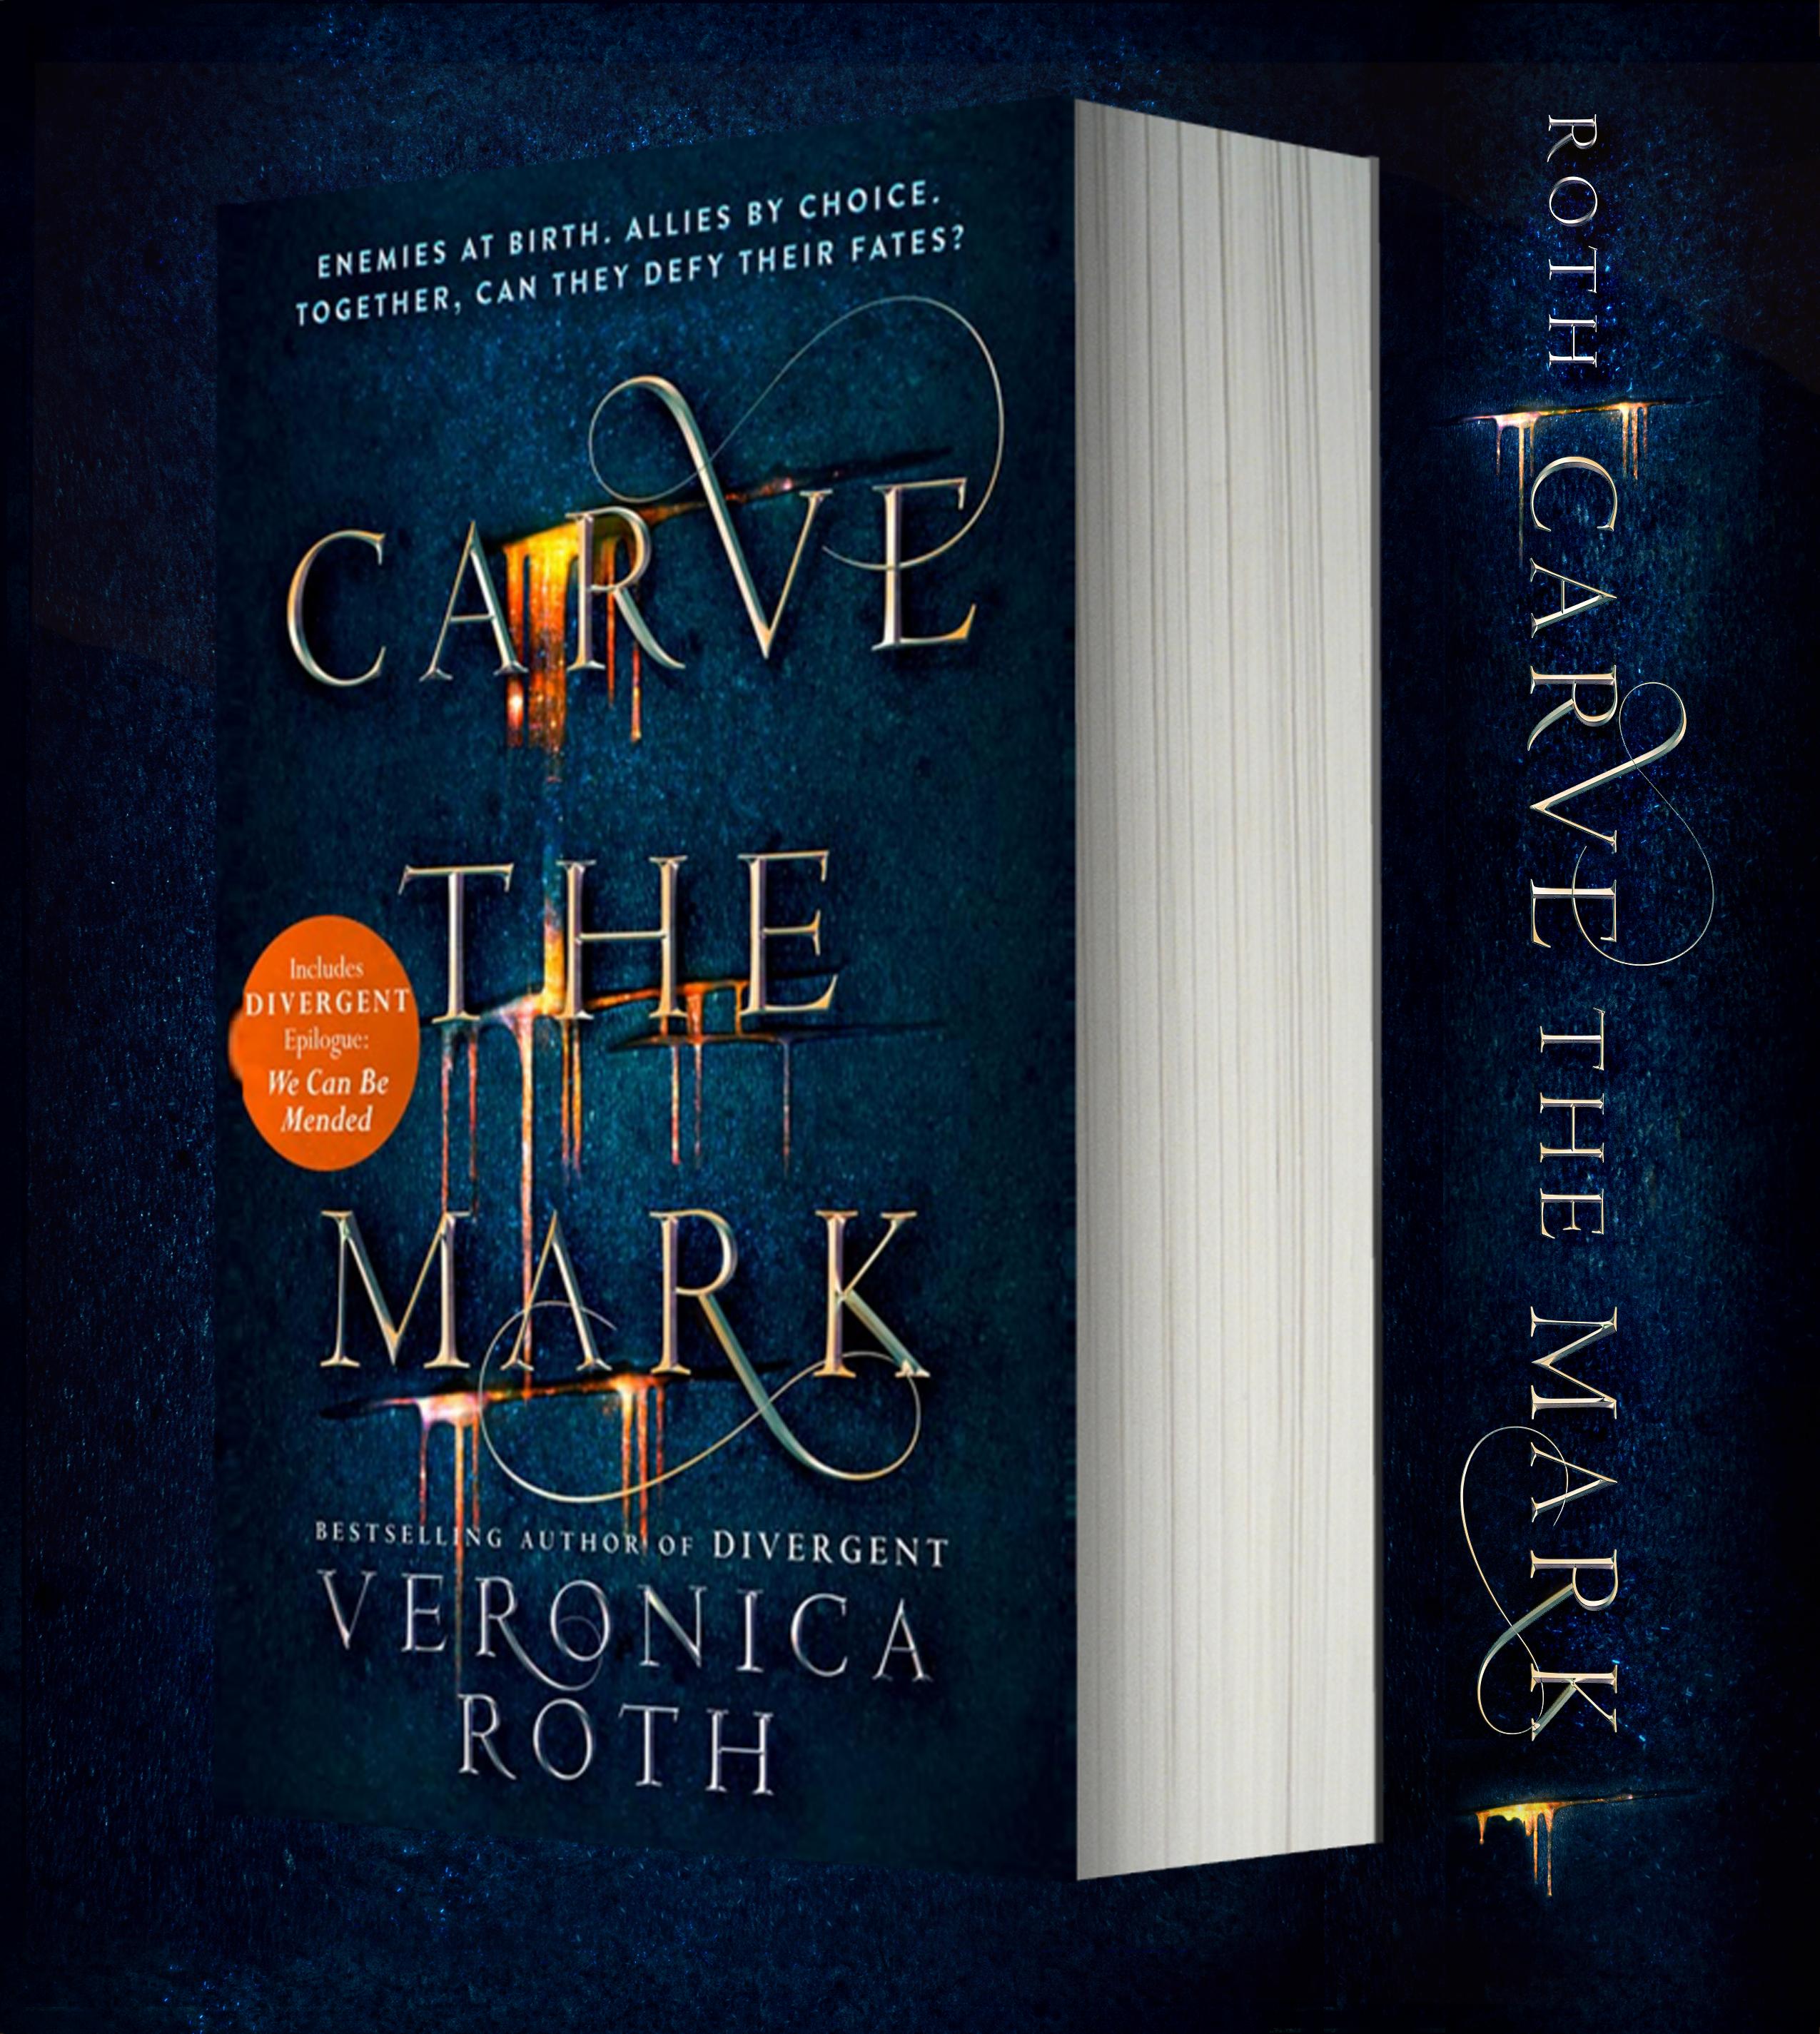 Carve The Mark Veronica Roth